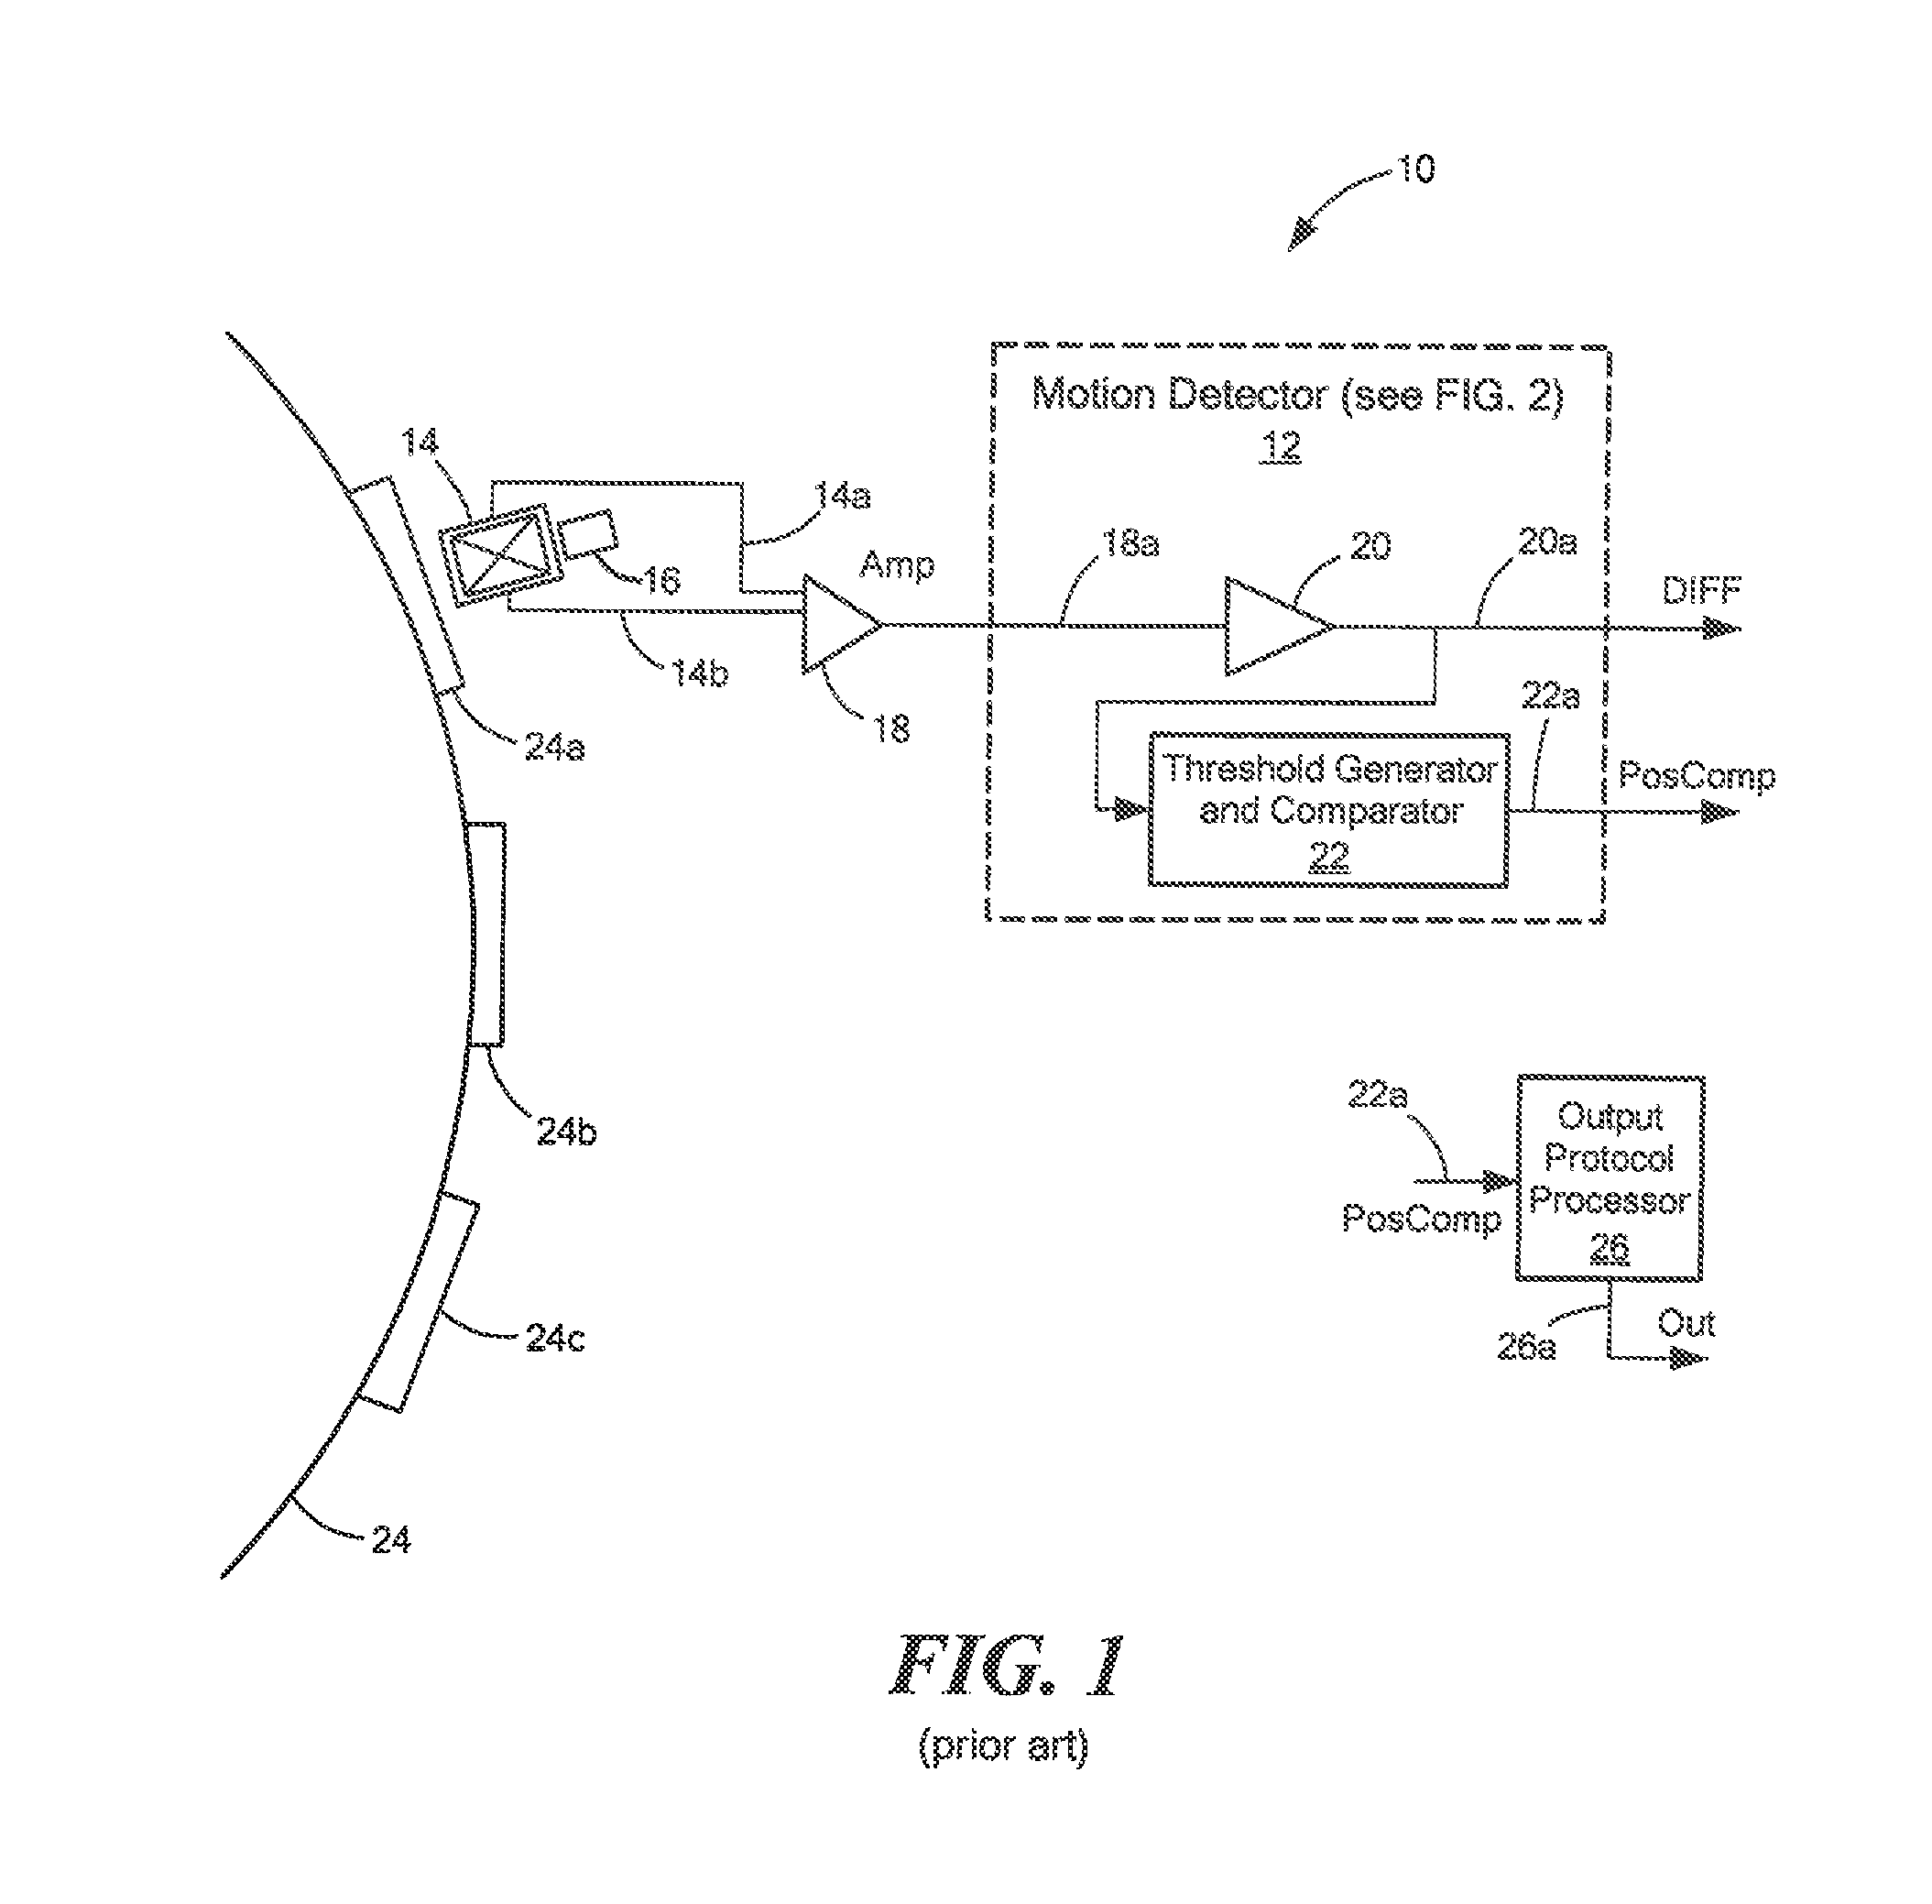 Circuits and methods for generating a threshold signal used in a magnetic field sensor based on a peak signal associated with a prior cycle of a magnetic field signal